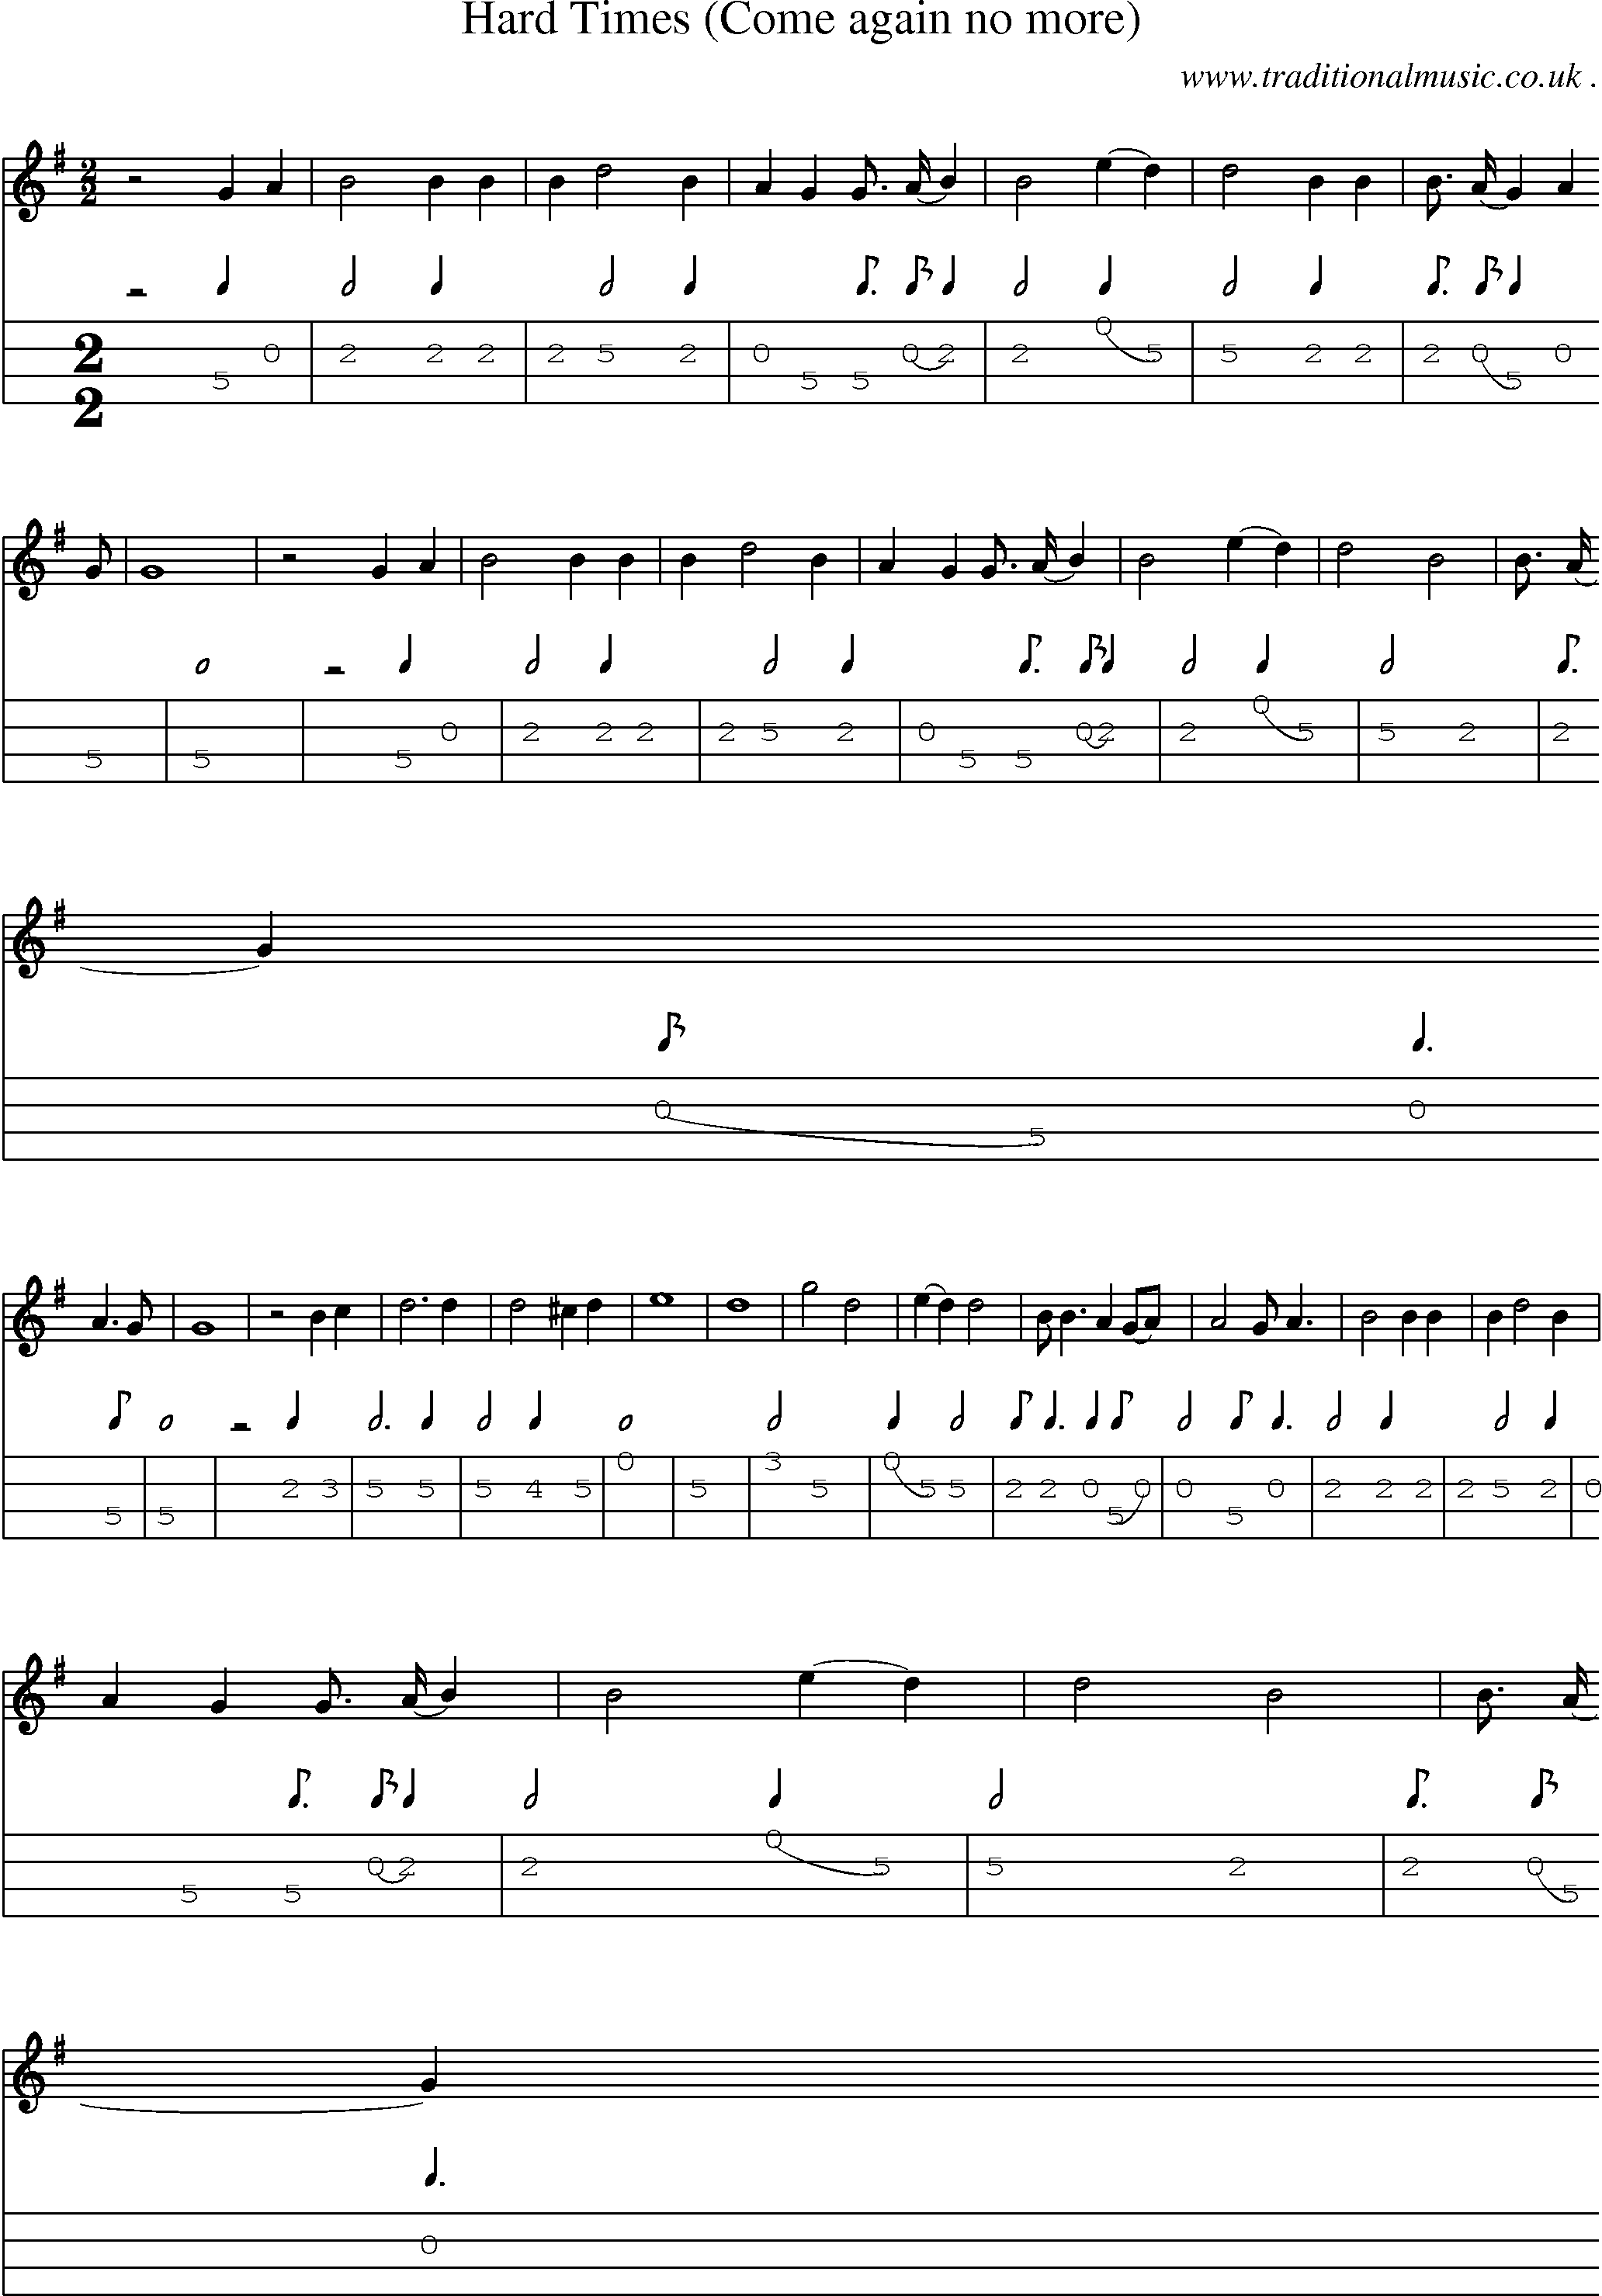 Music Score and Guitar Tabs for Hard Times (come Again No More)